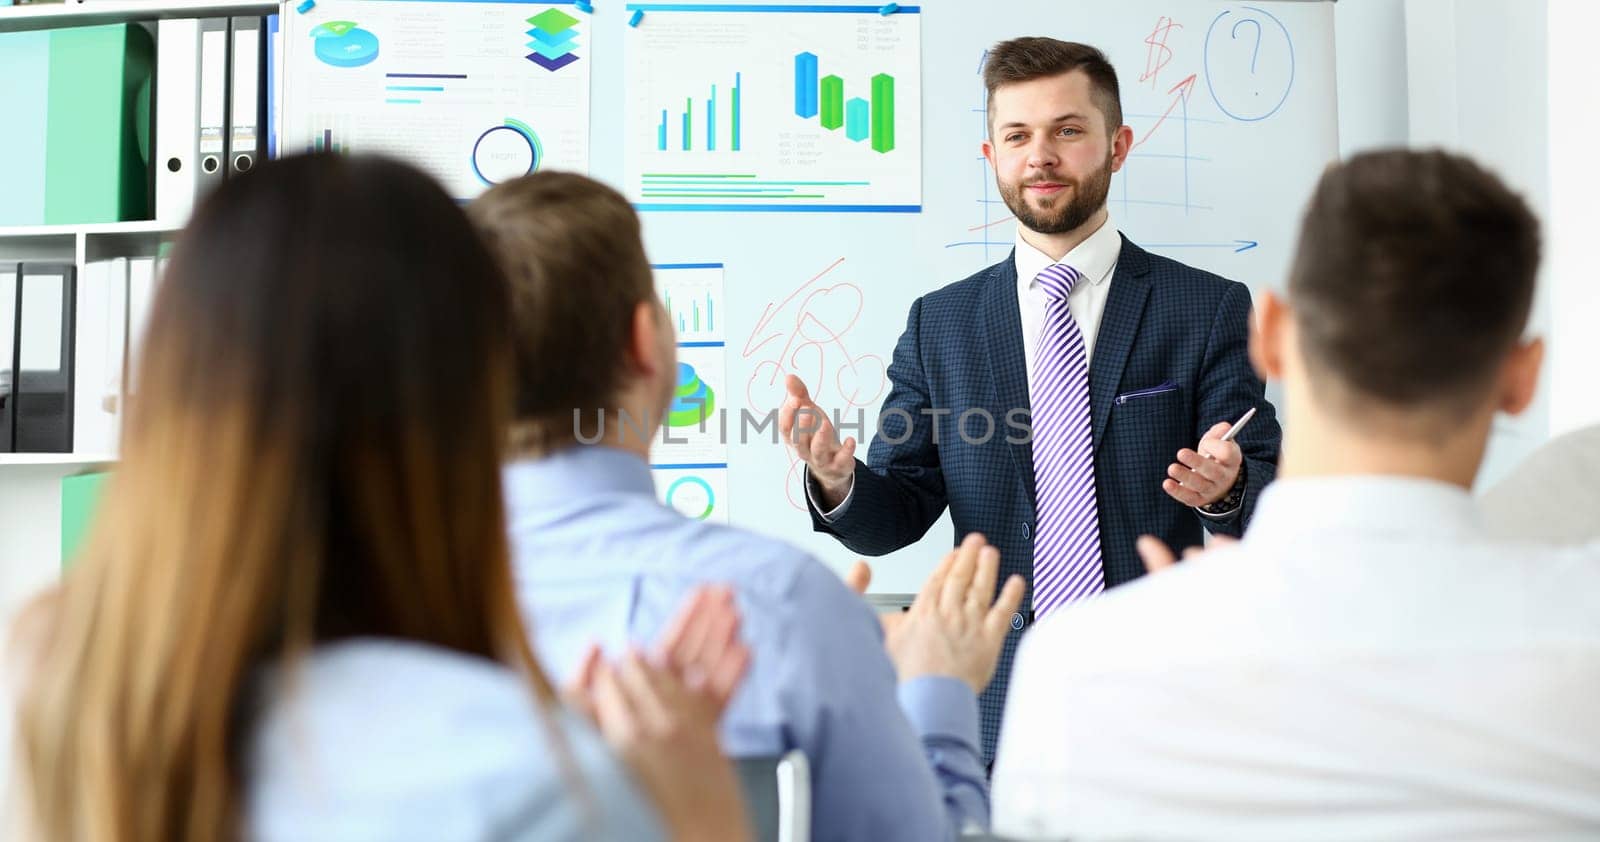 Bunch of people listening man in suit and tie telling something about financial concept